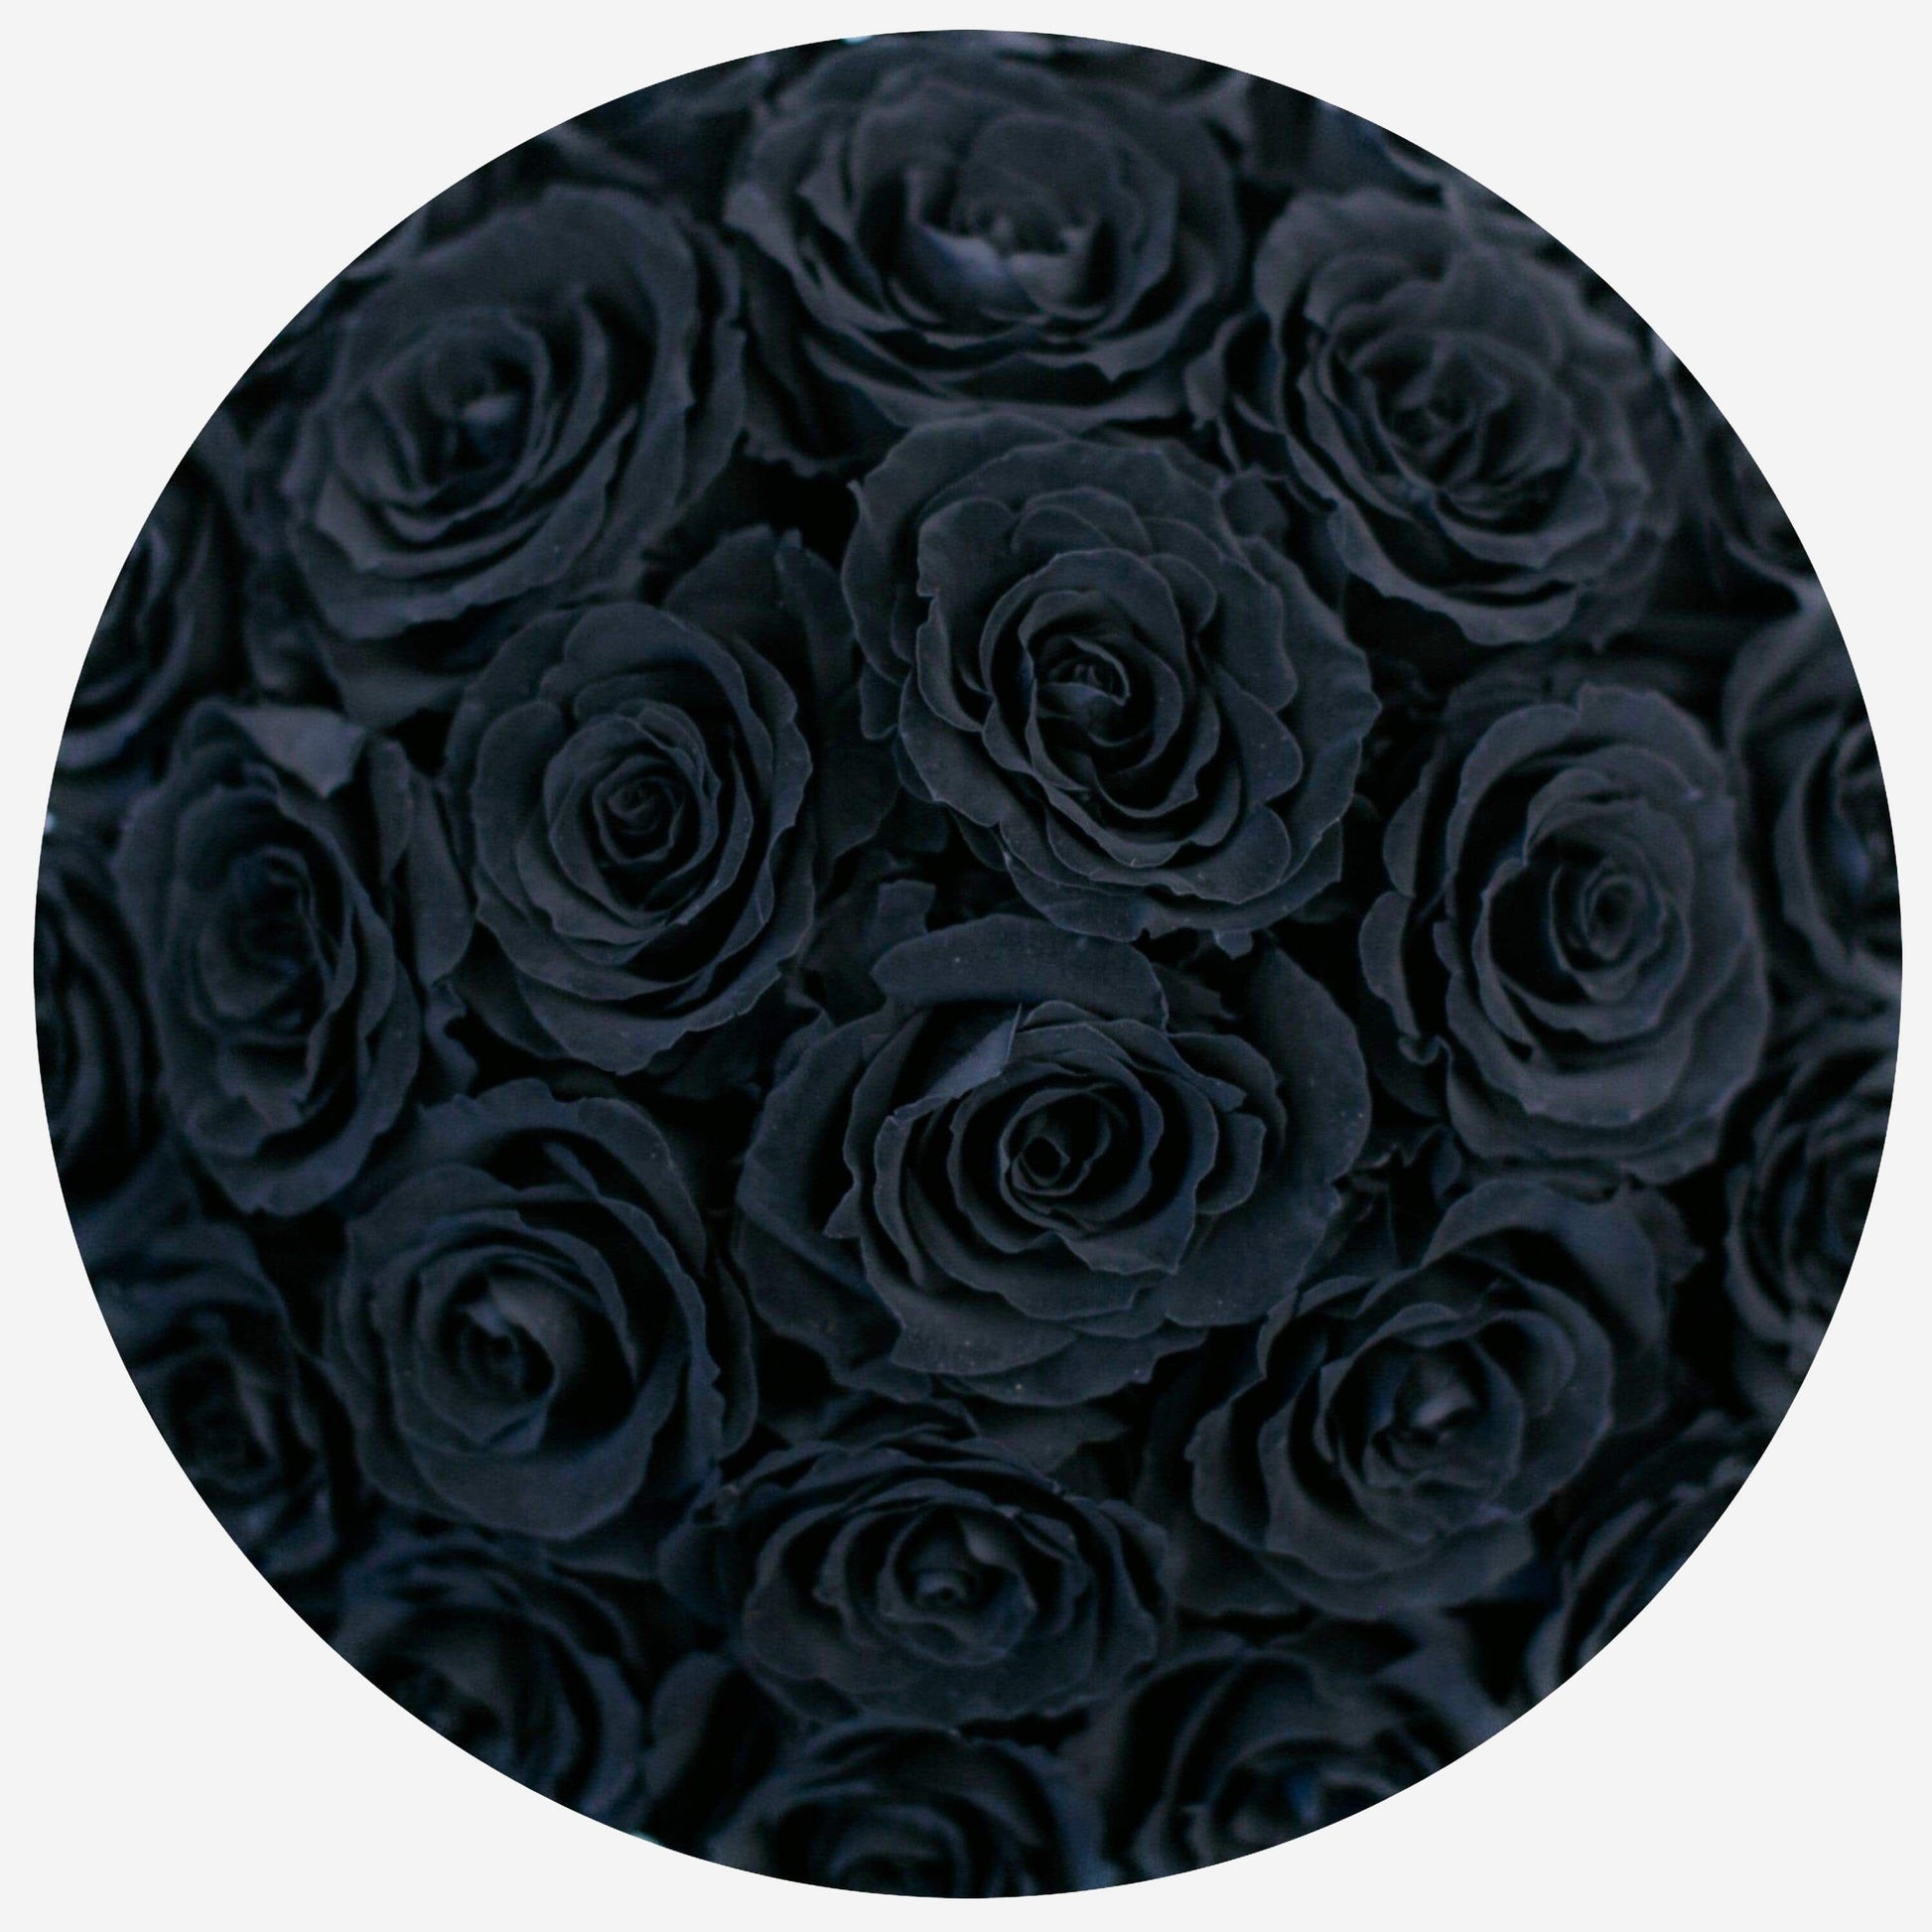 Classic Dome Hot Pink Suede Box | Black Roses - The Million Roses